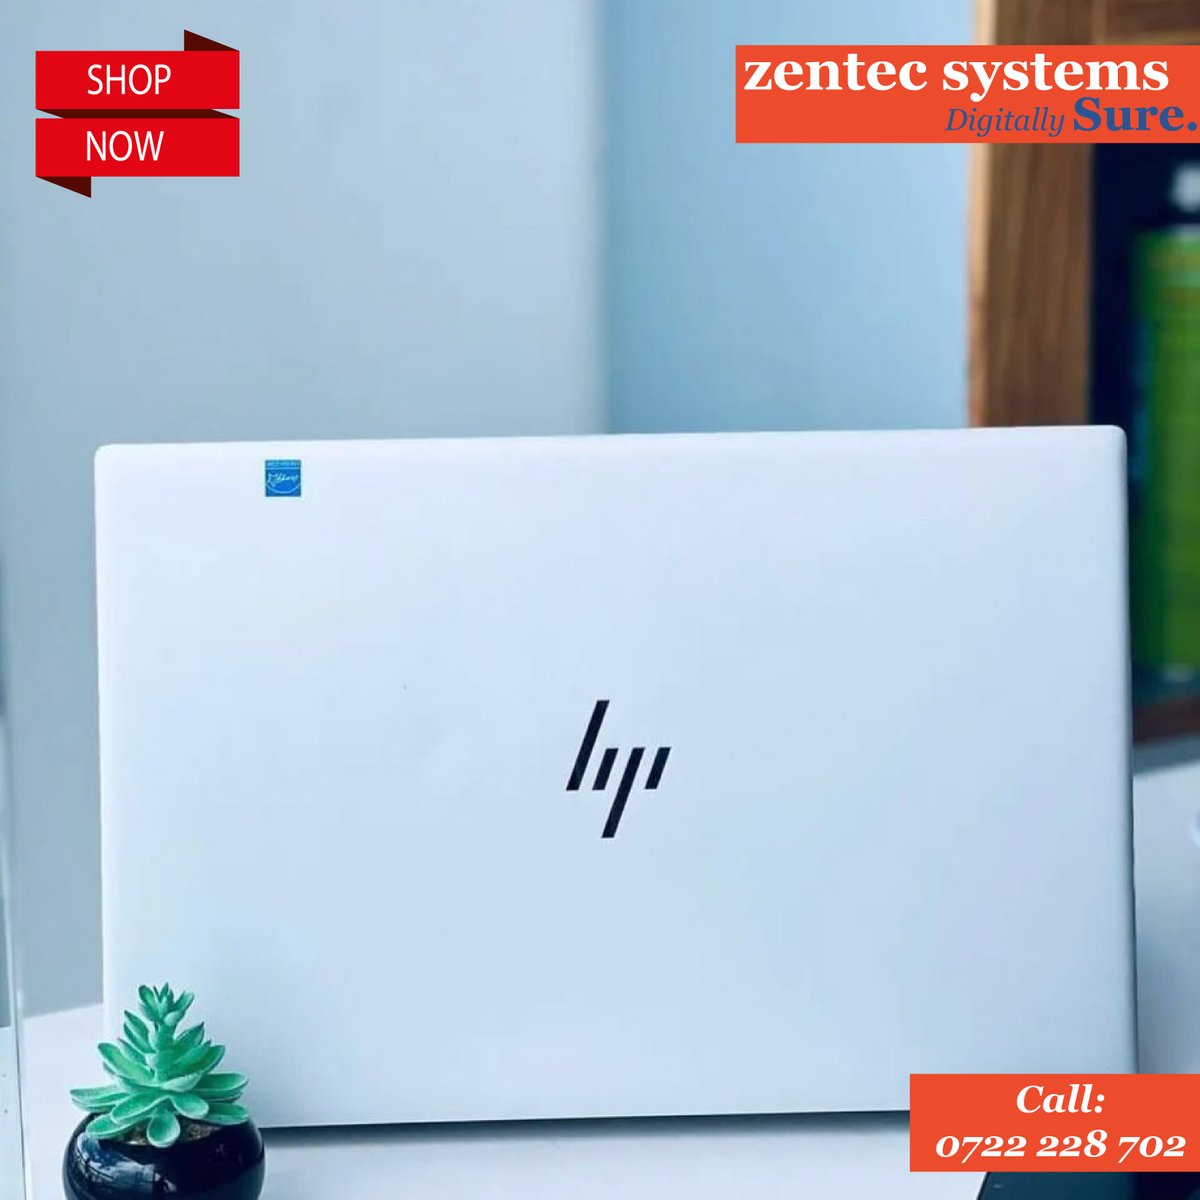 Hp envy 15
Powerful gamin & intensive graphics pc
Speed up to 5.0Ghz
Core i7, 10th generation 
RAM 16GB
SSD 1TB 
Display 15.6 inches
NVIDIA GRAPHICS GTX 1650ti
4GB Dedicated memory
UHD Graphics 8GB

#laptopsale #offer #trio #gaminglaptop #servicelaptop #computers #desktop  #KCSE